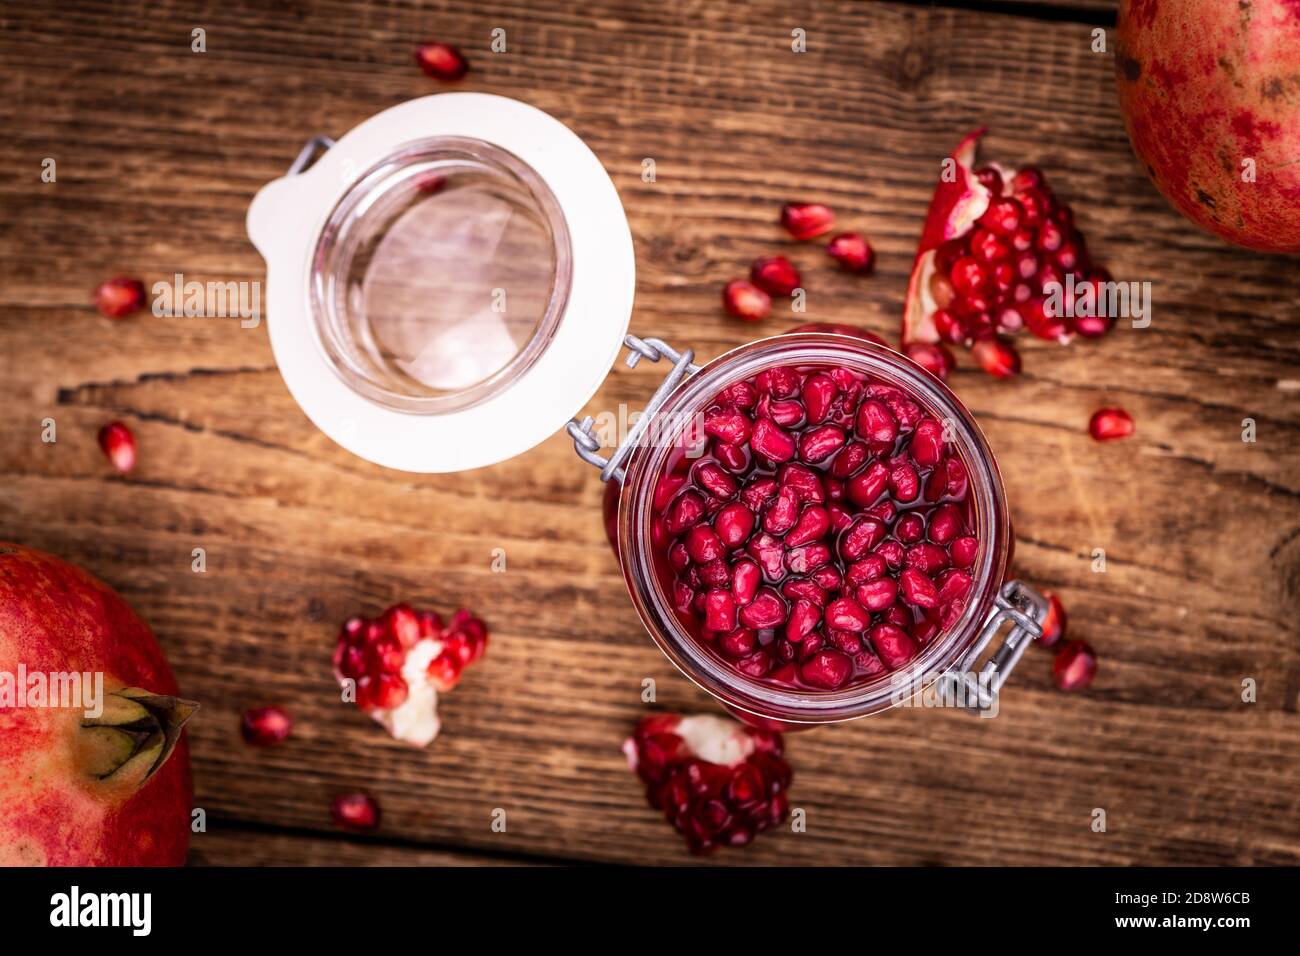 Portion of healthy preserved Pomegranate seeds on an old wooden table (selective focus; close-up shot) Stock Photo